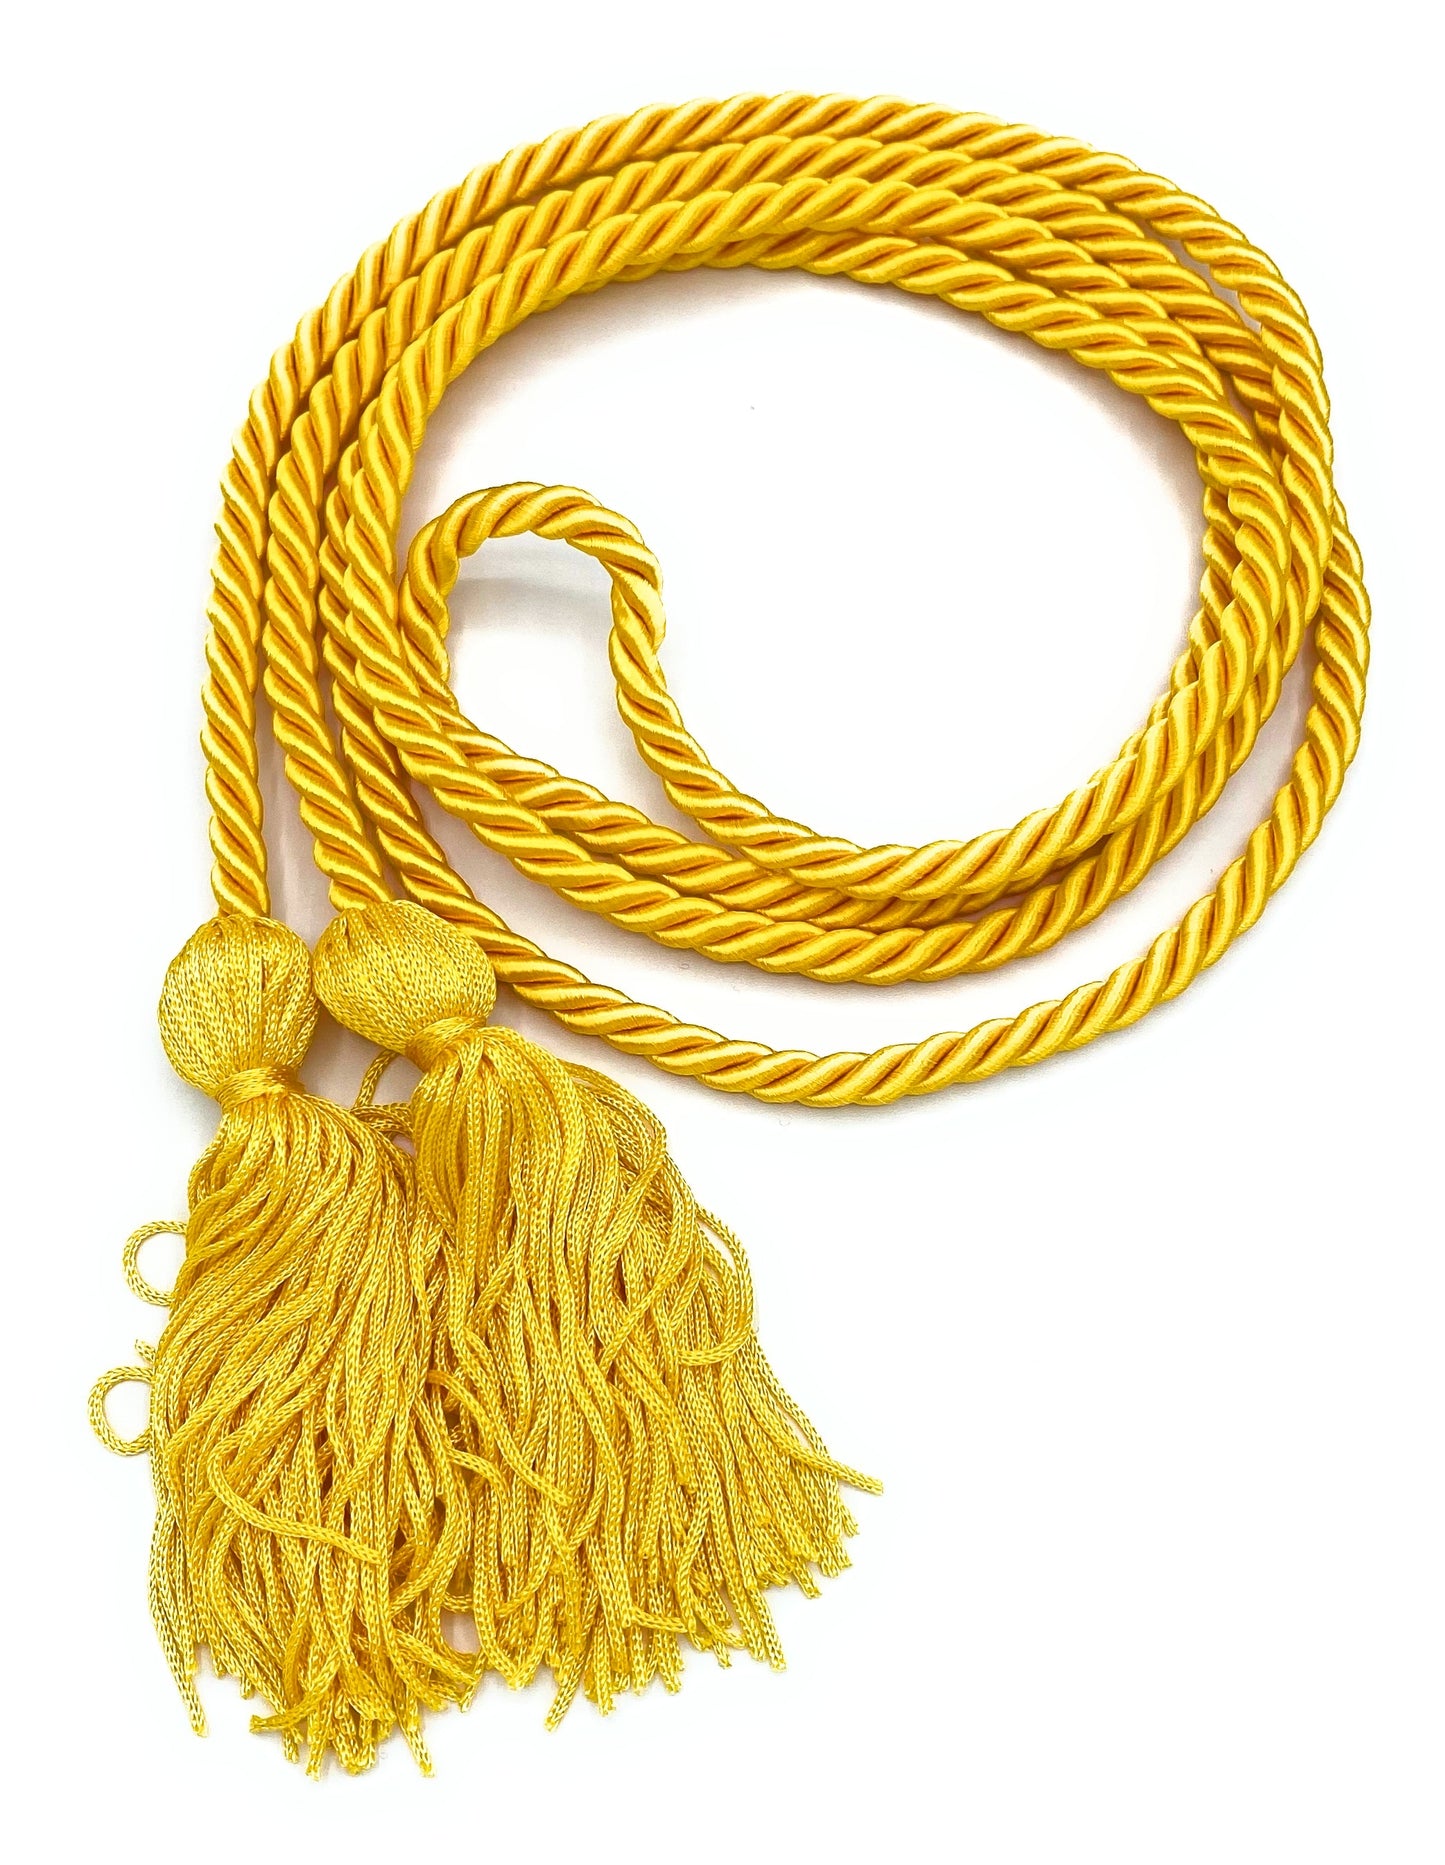 Single Graduation Honor Cords (21 Colors Available) - Honor Cord Source 